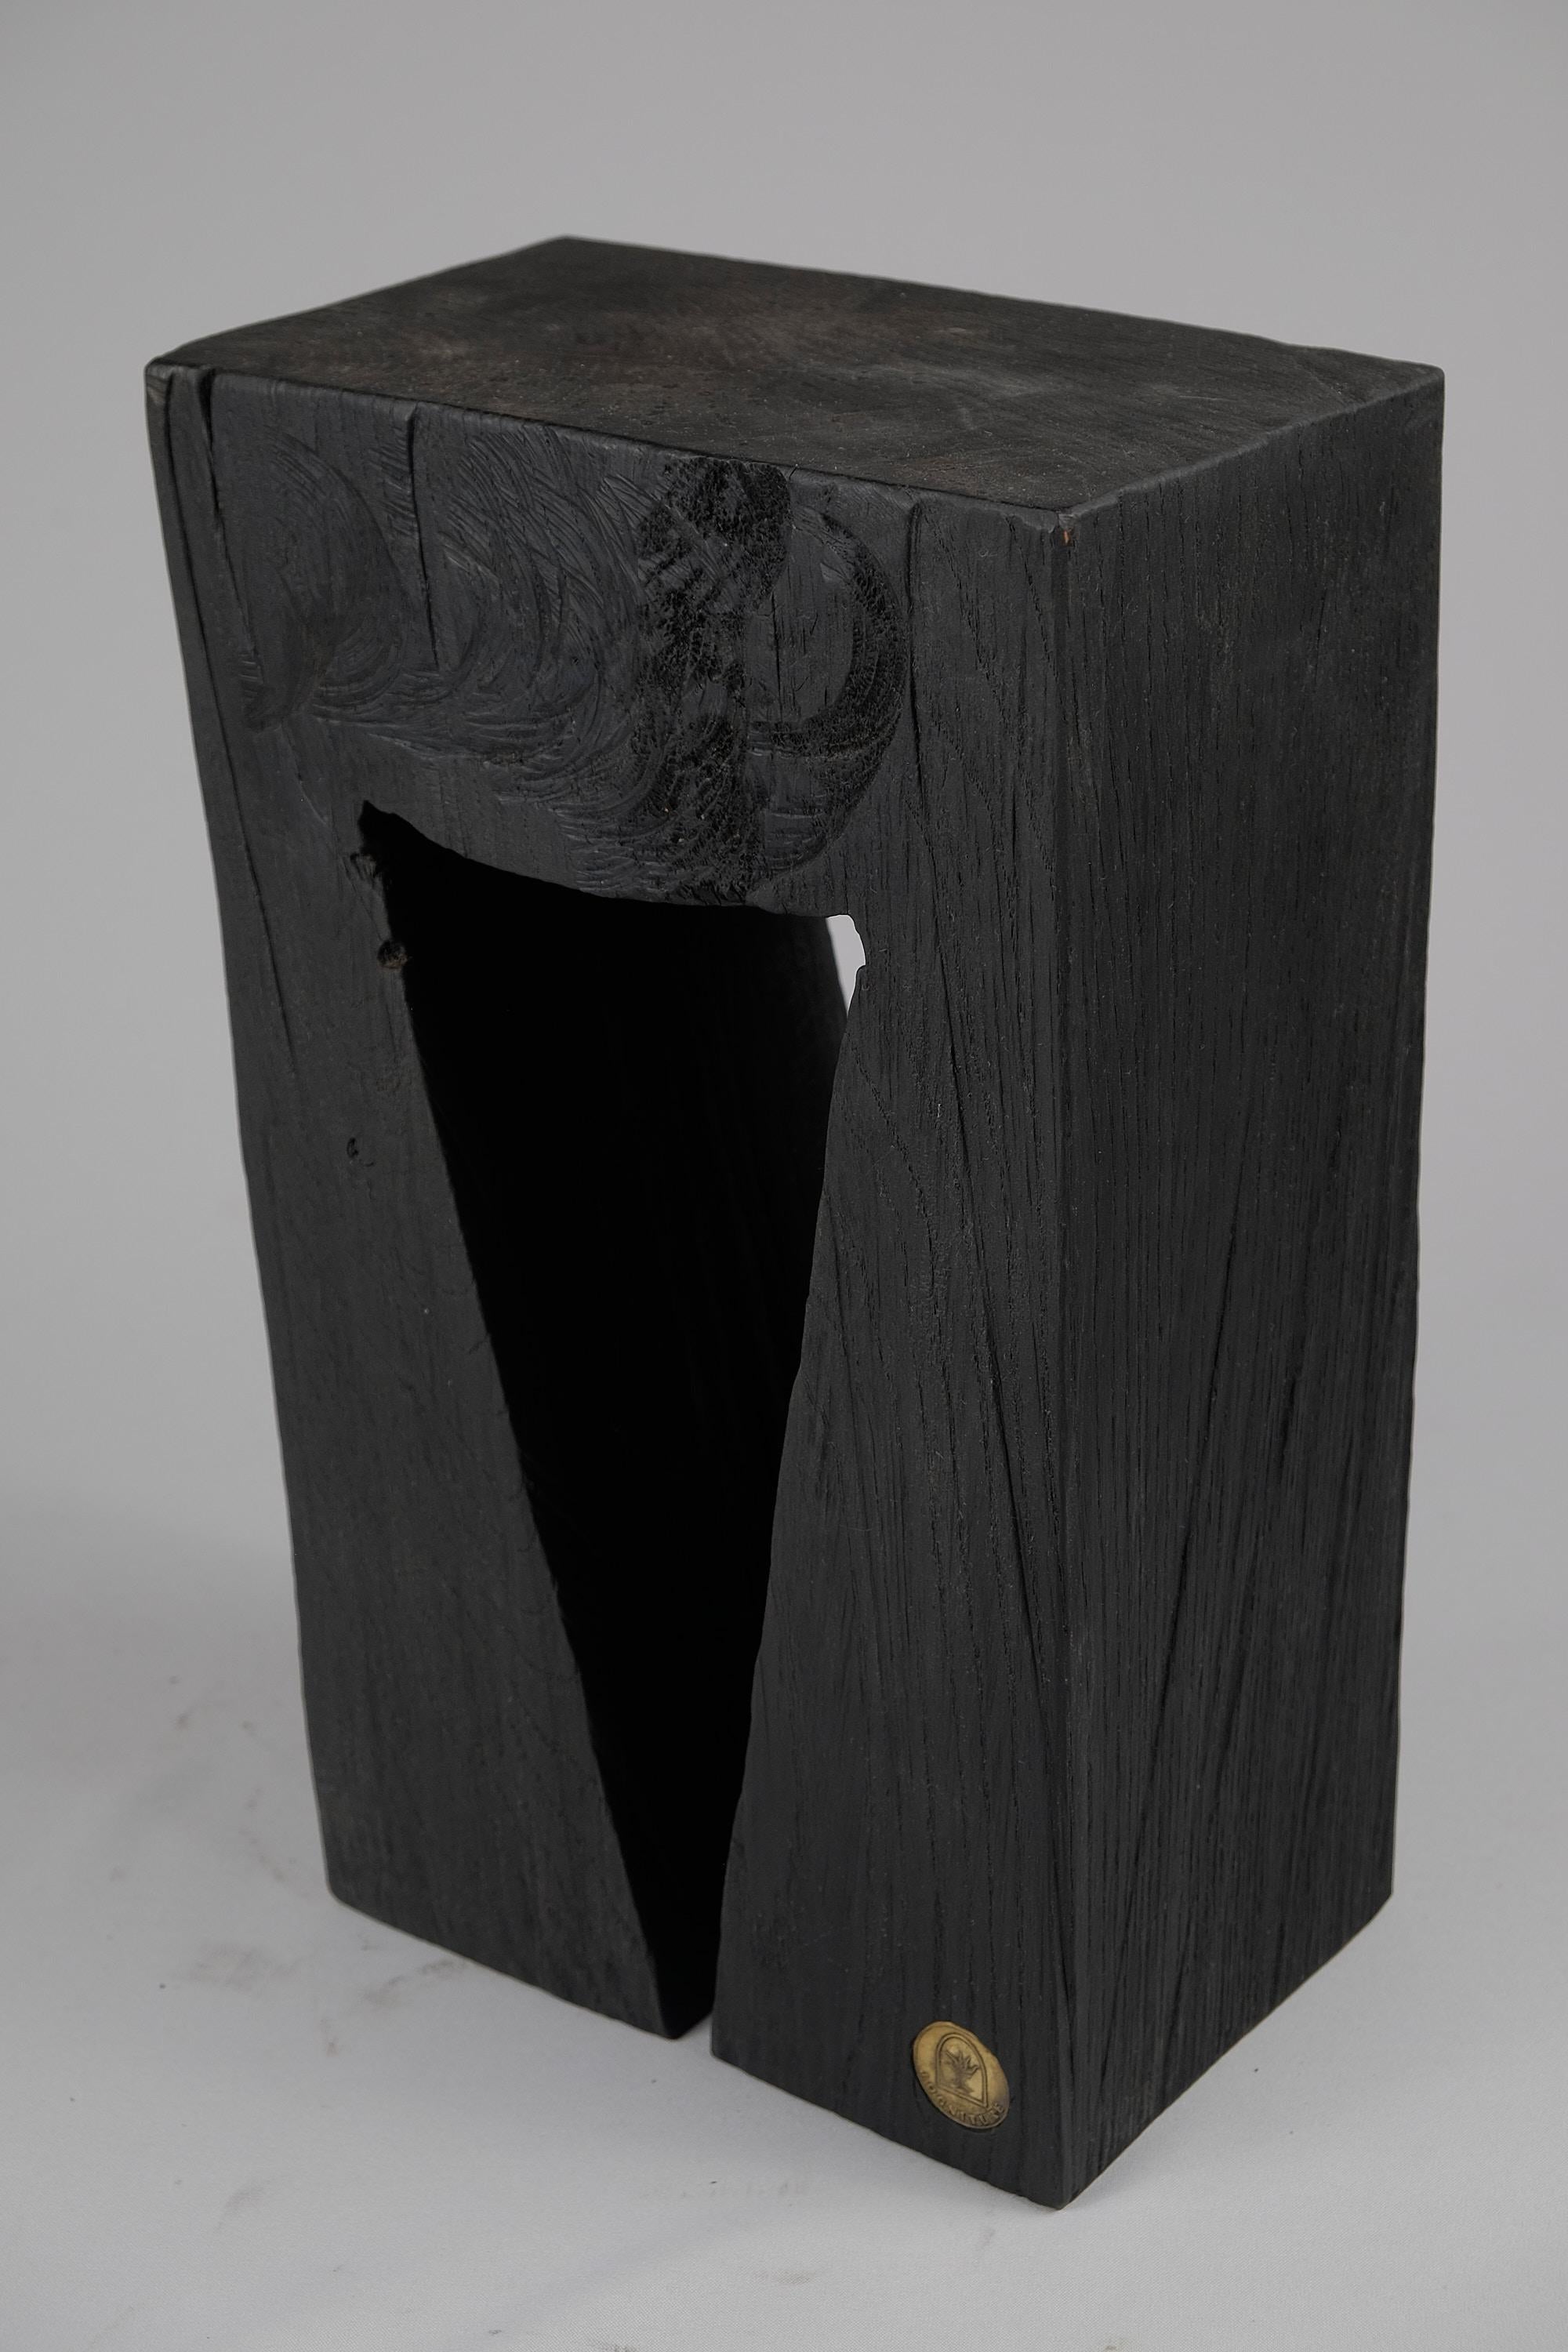 Carved Solid Burnt Wood, Side Table, Stool, Original Contemporary Design, Logniture